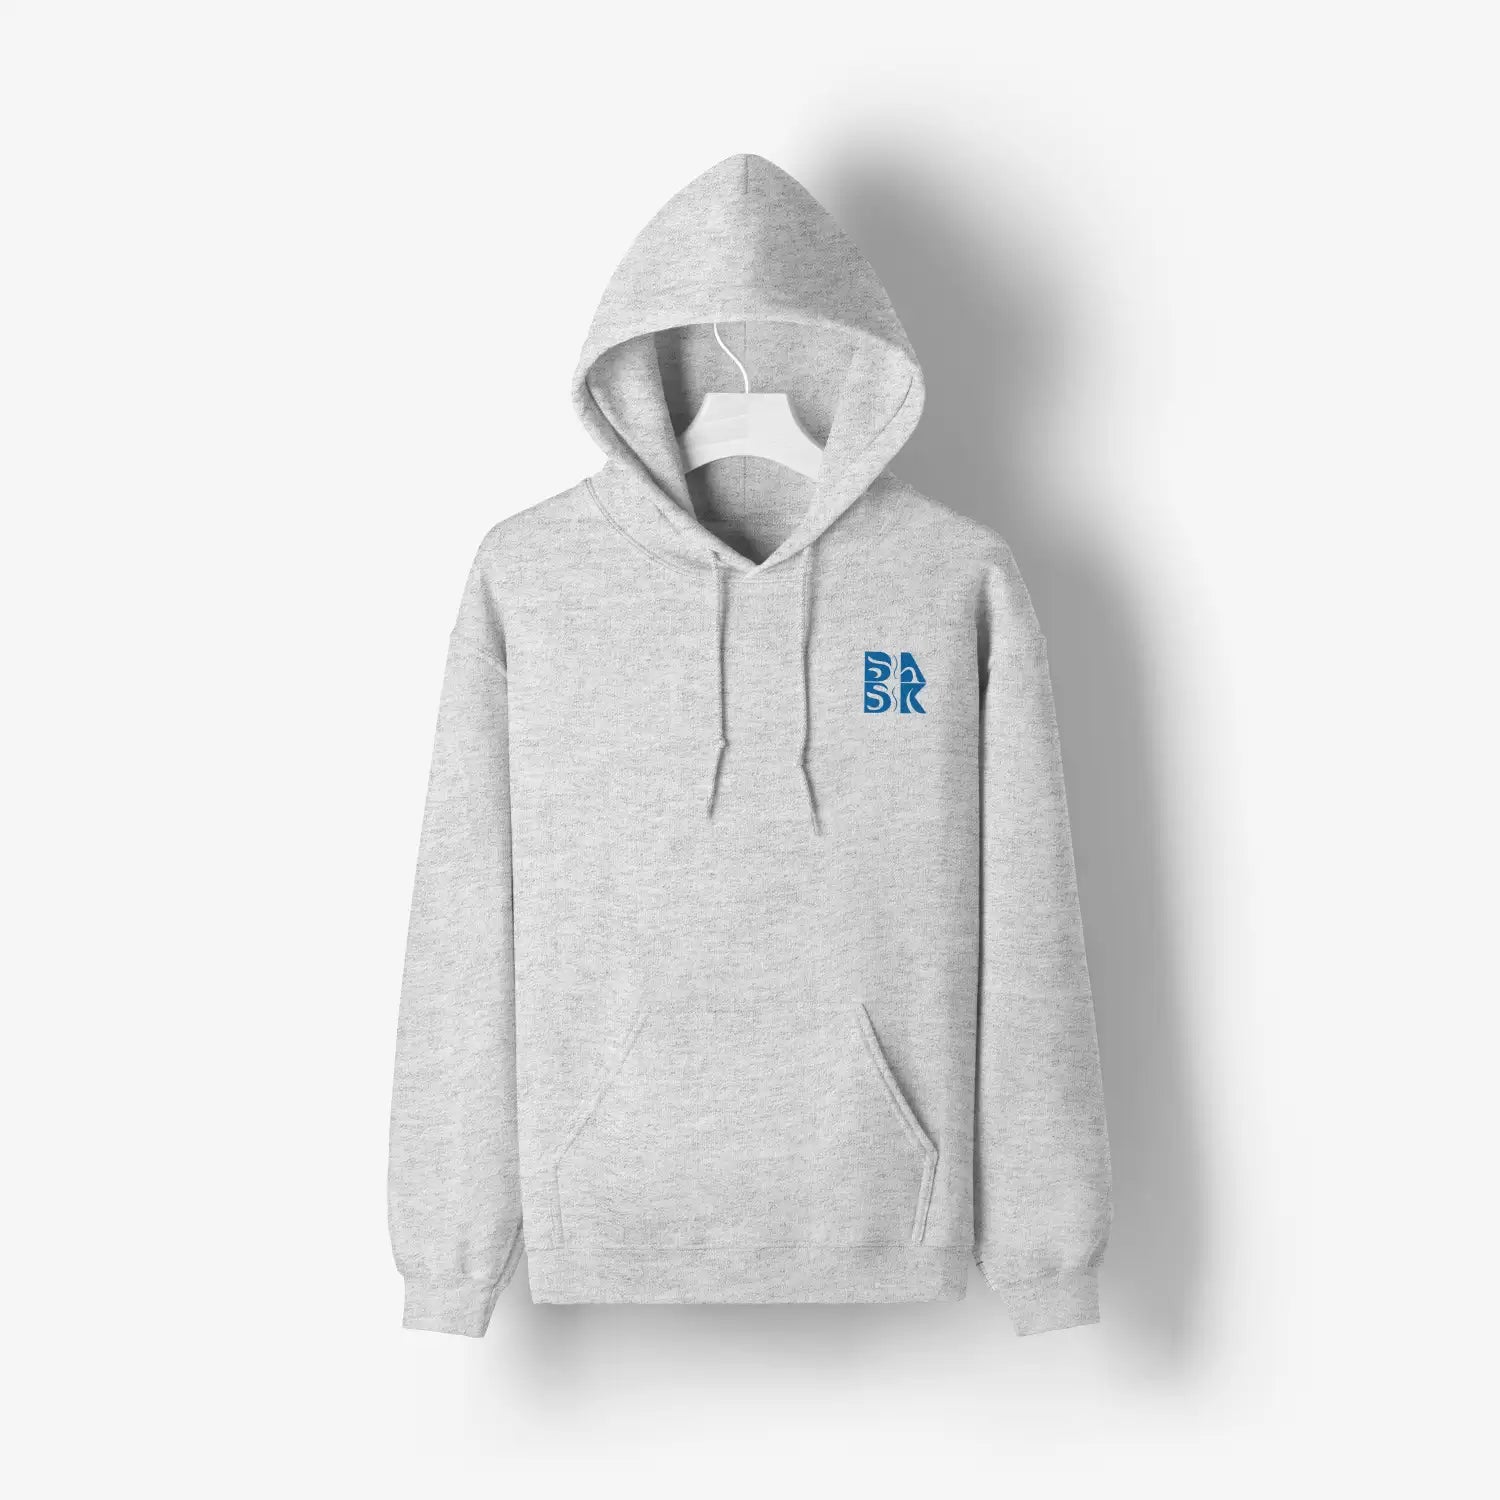 A Hawaiian-inspired Be Still and Know Kupa'a Tide Hoodie in grey with the letter b on it.